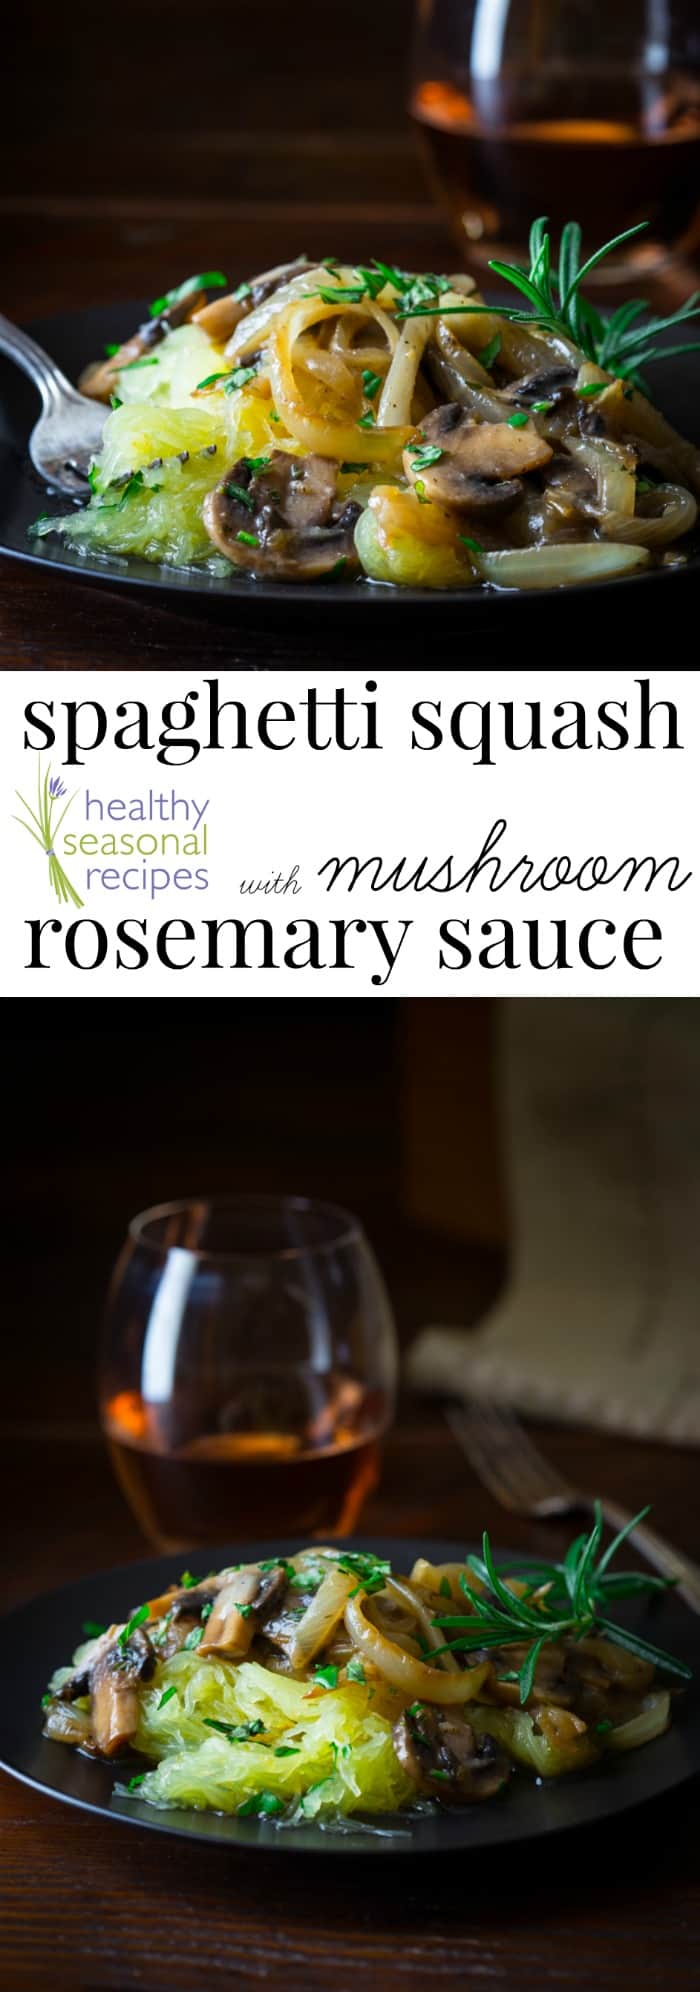 spaghetti squash with mushrooms collage with text overlay